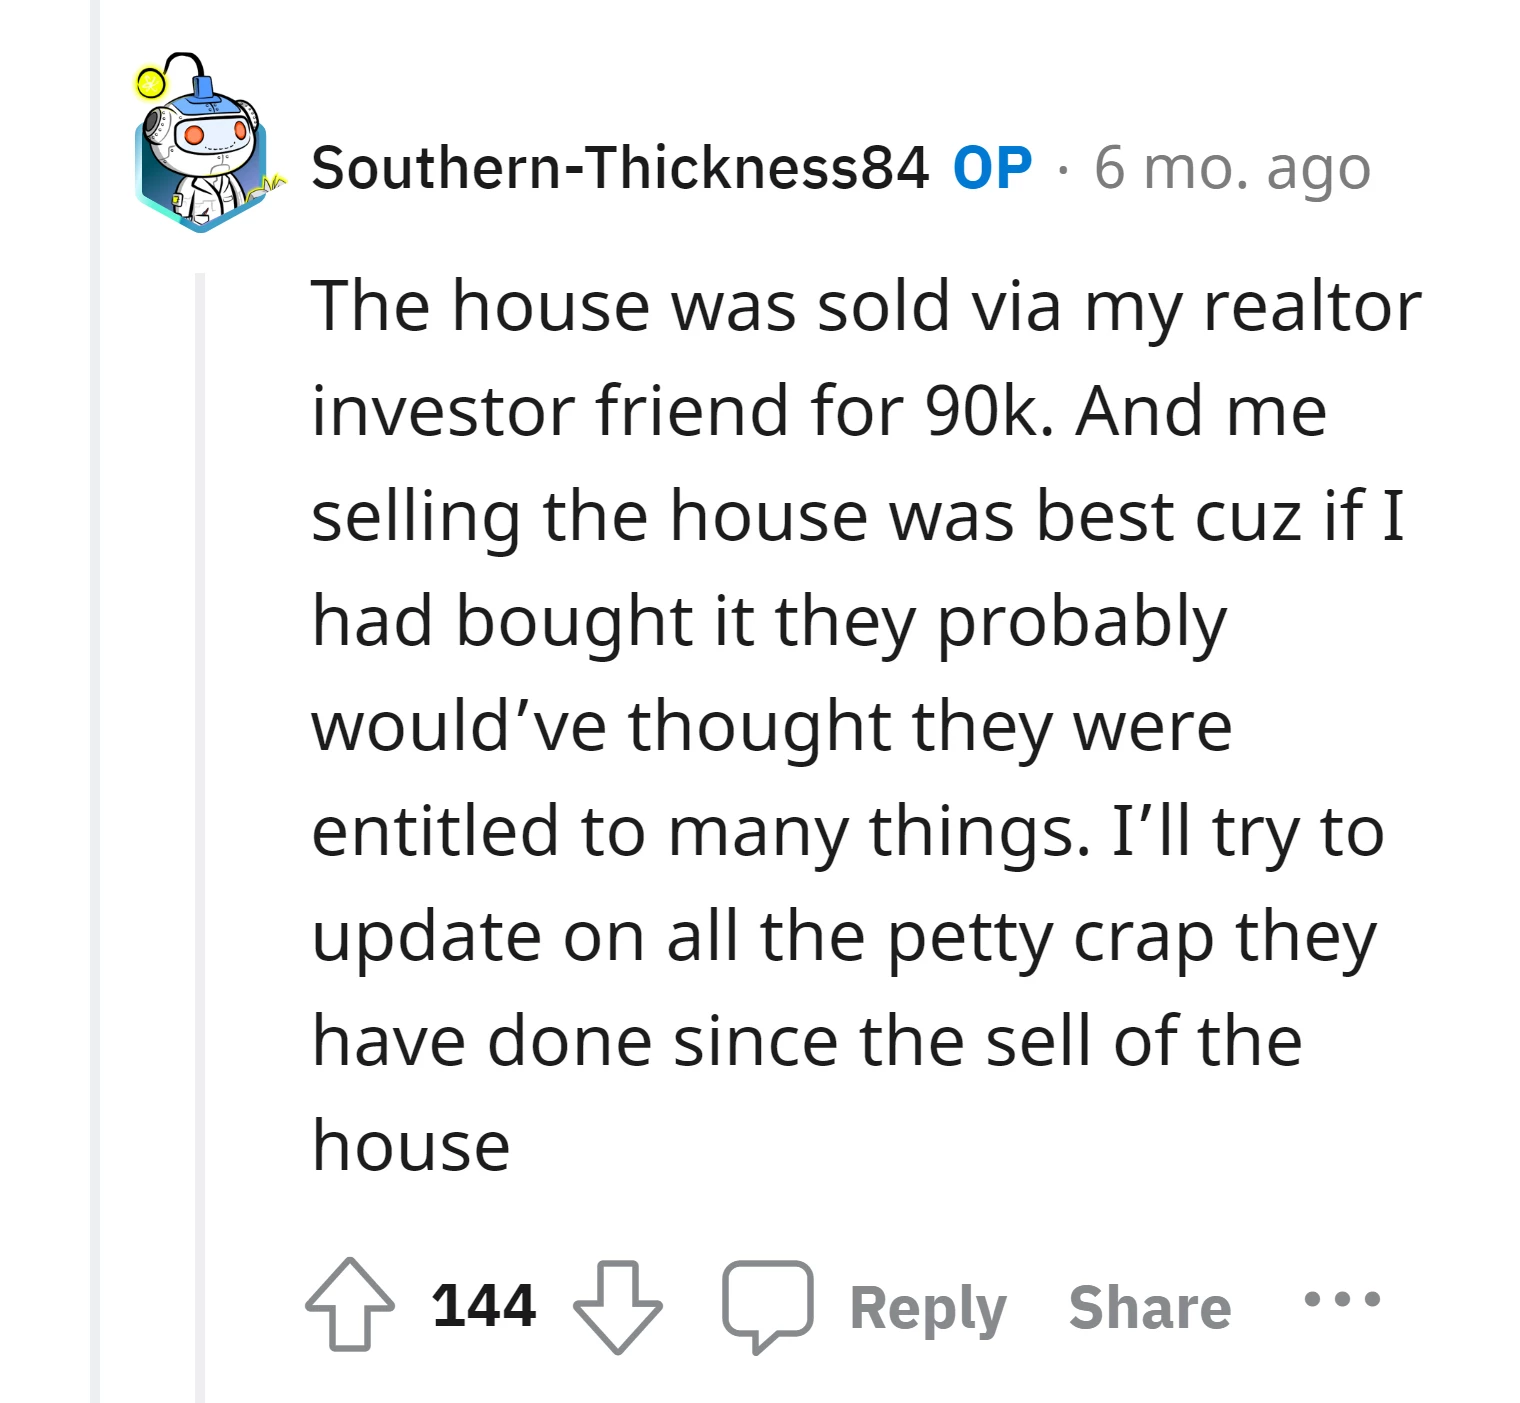 Selling the house was the best decision to avoid potential entitlement issues from family